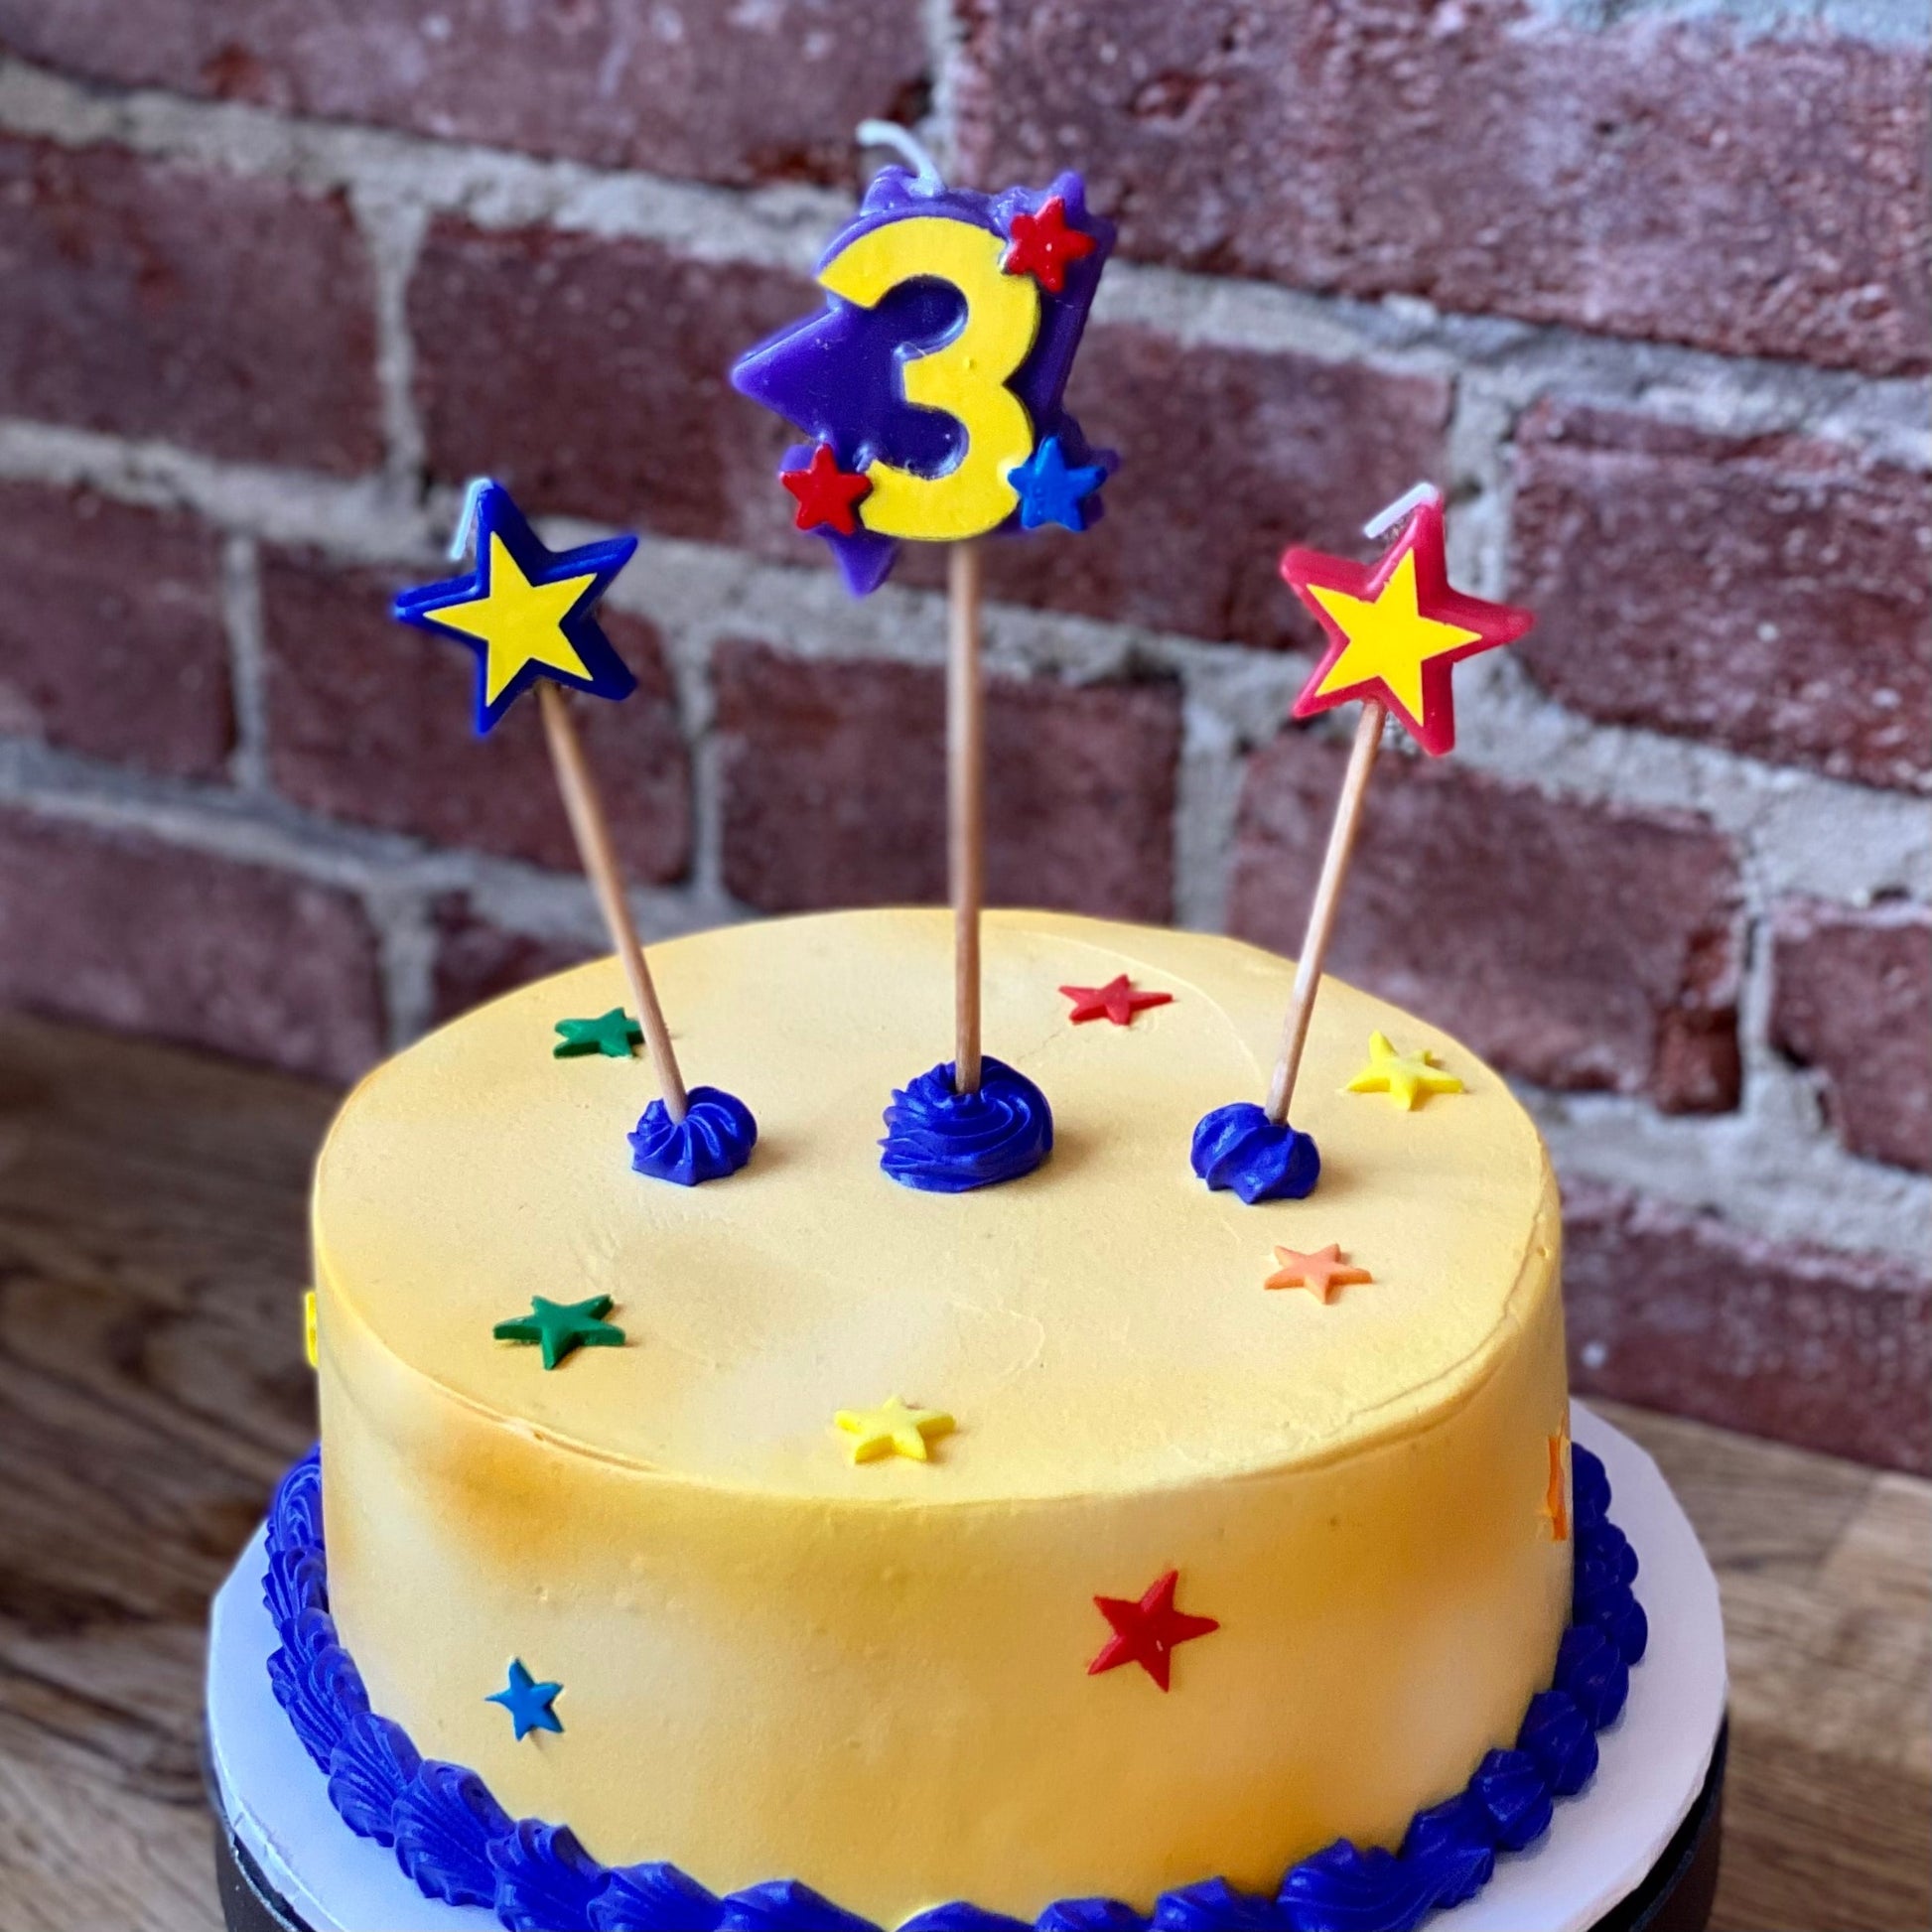 Kids birthday cake with candle of the number three